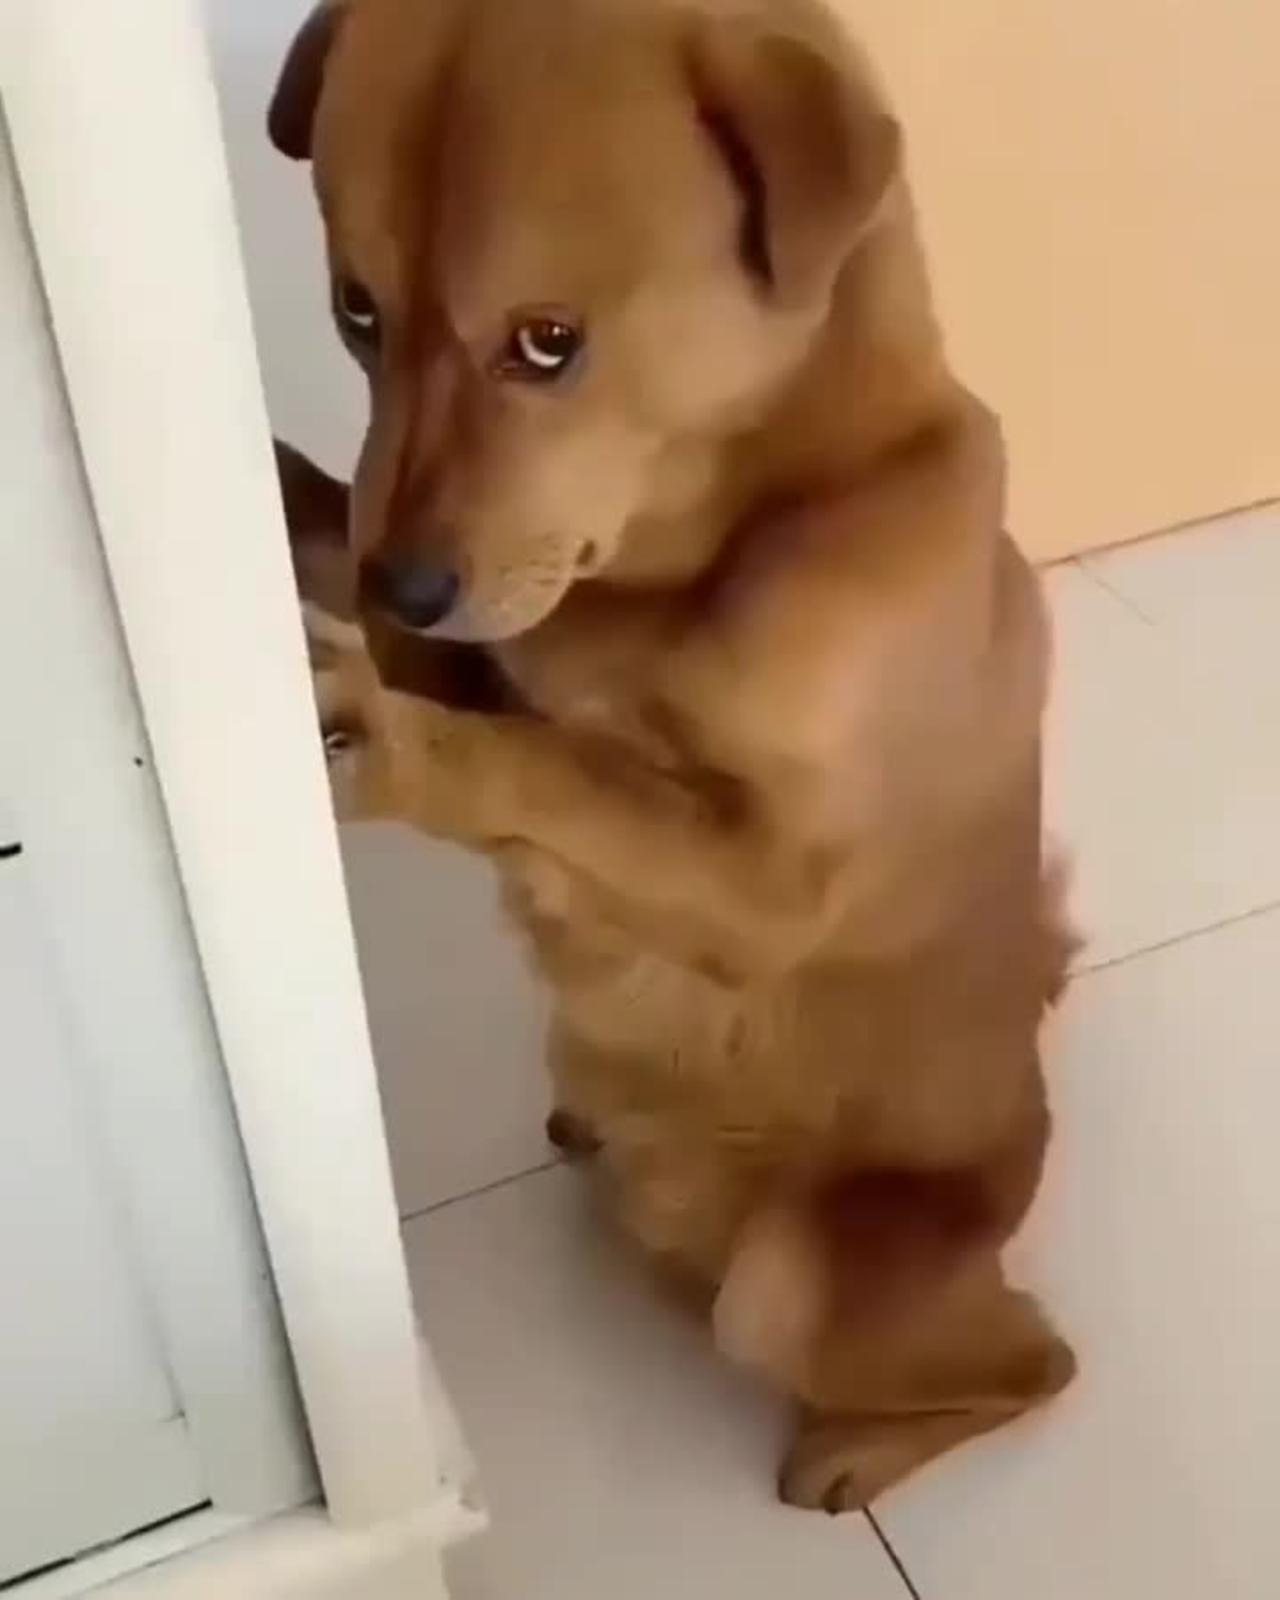 So cute and funny dog🐕